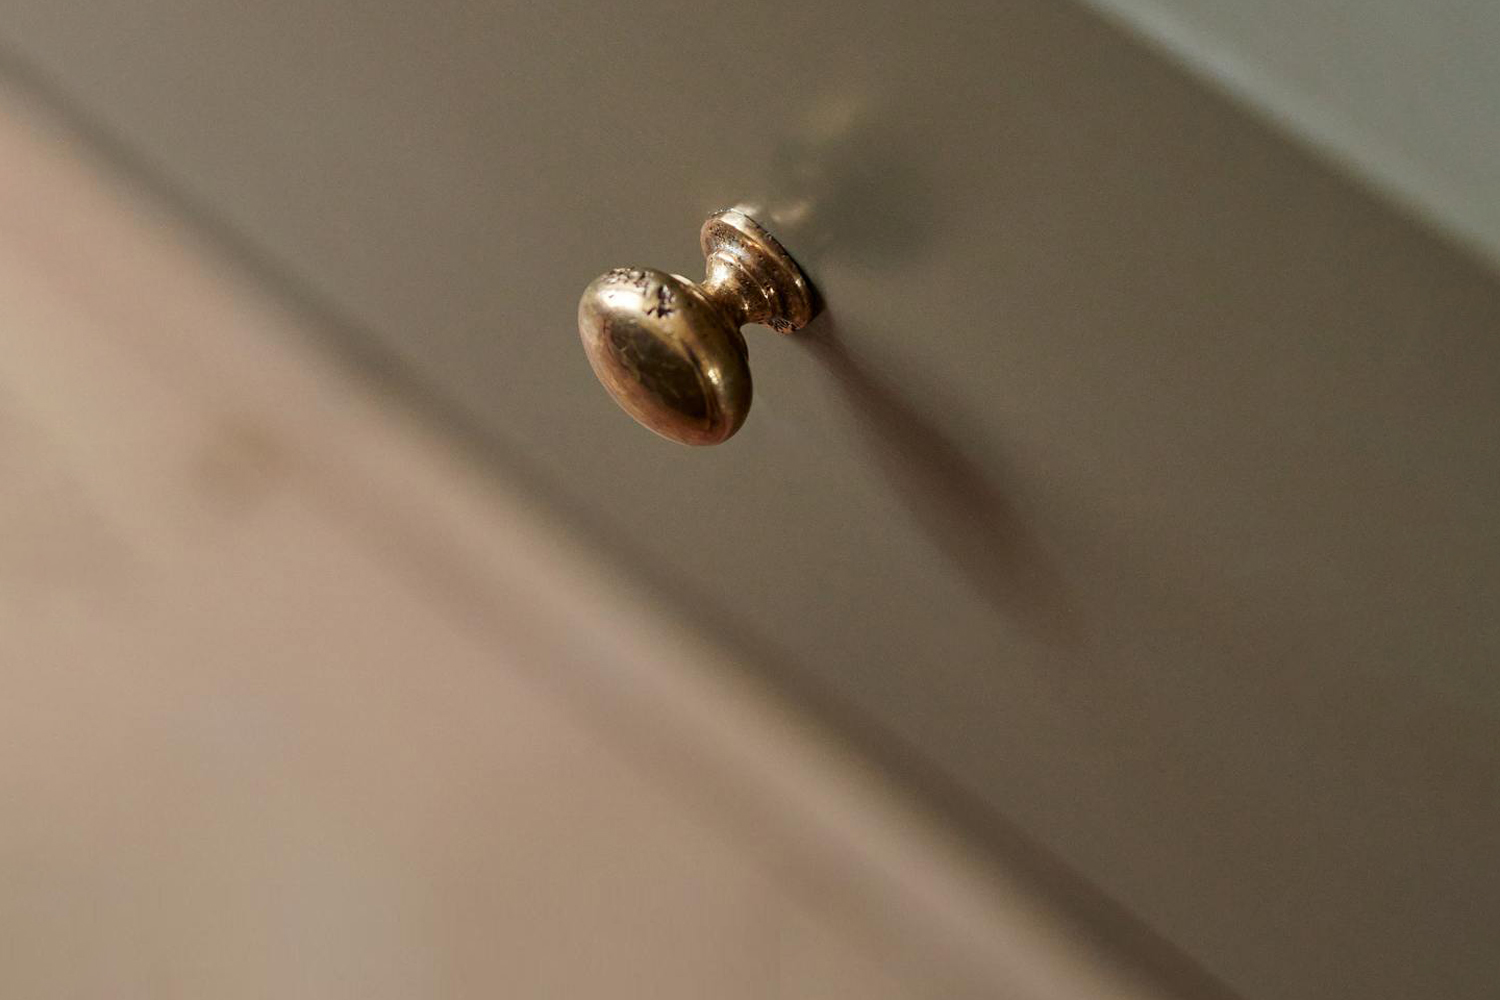 the cabinet knobs are the devol classic knobs in aged brass; \$55 for the mediu 24